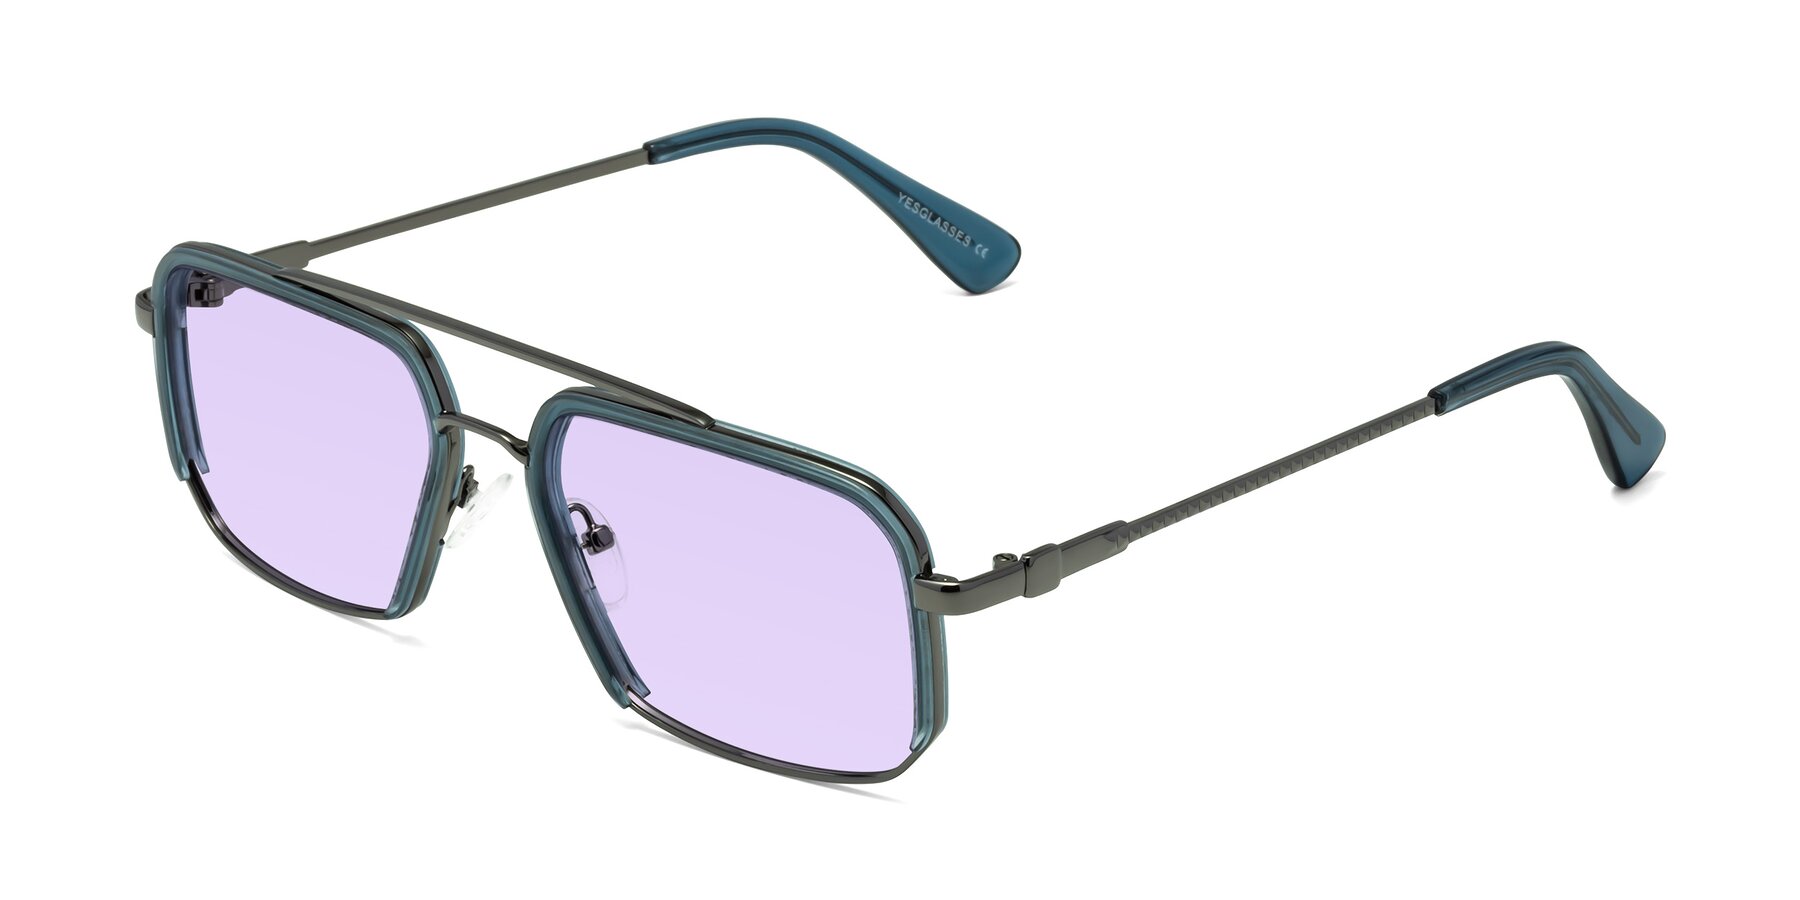 Angle of Dechter in Teal-Gunmetal with Light Purple Tinted Lenses